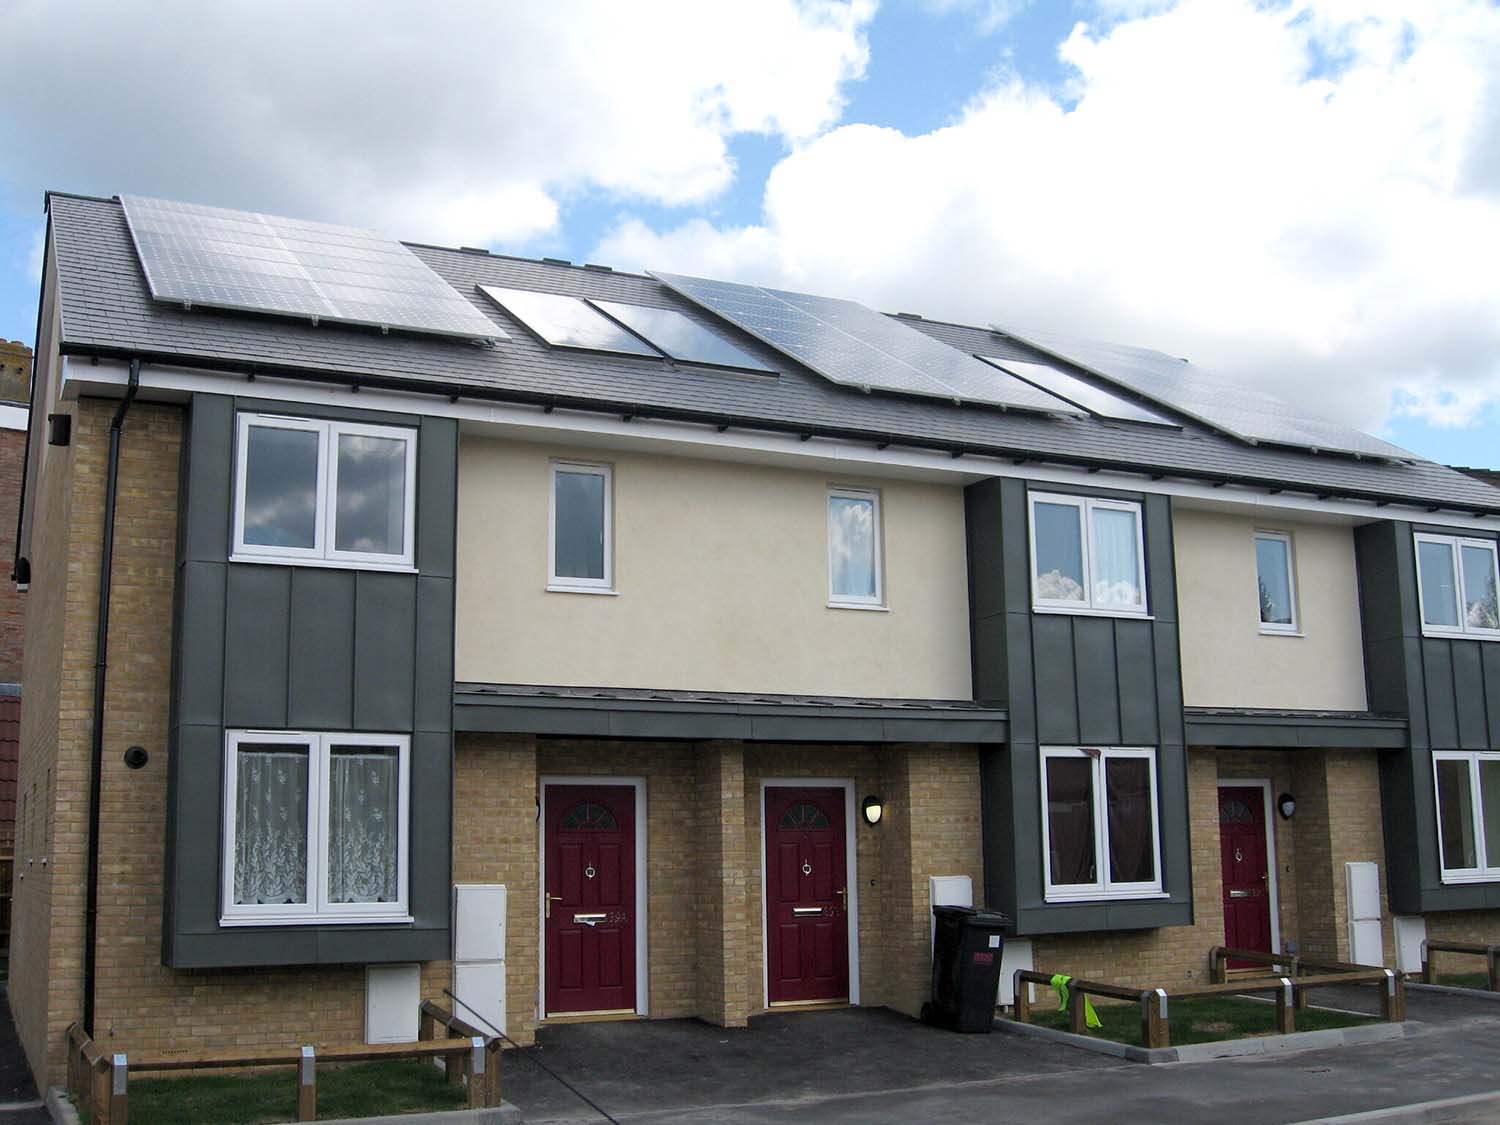 myriad-residential-sector-house-with-pv-panels